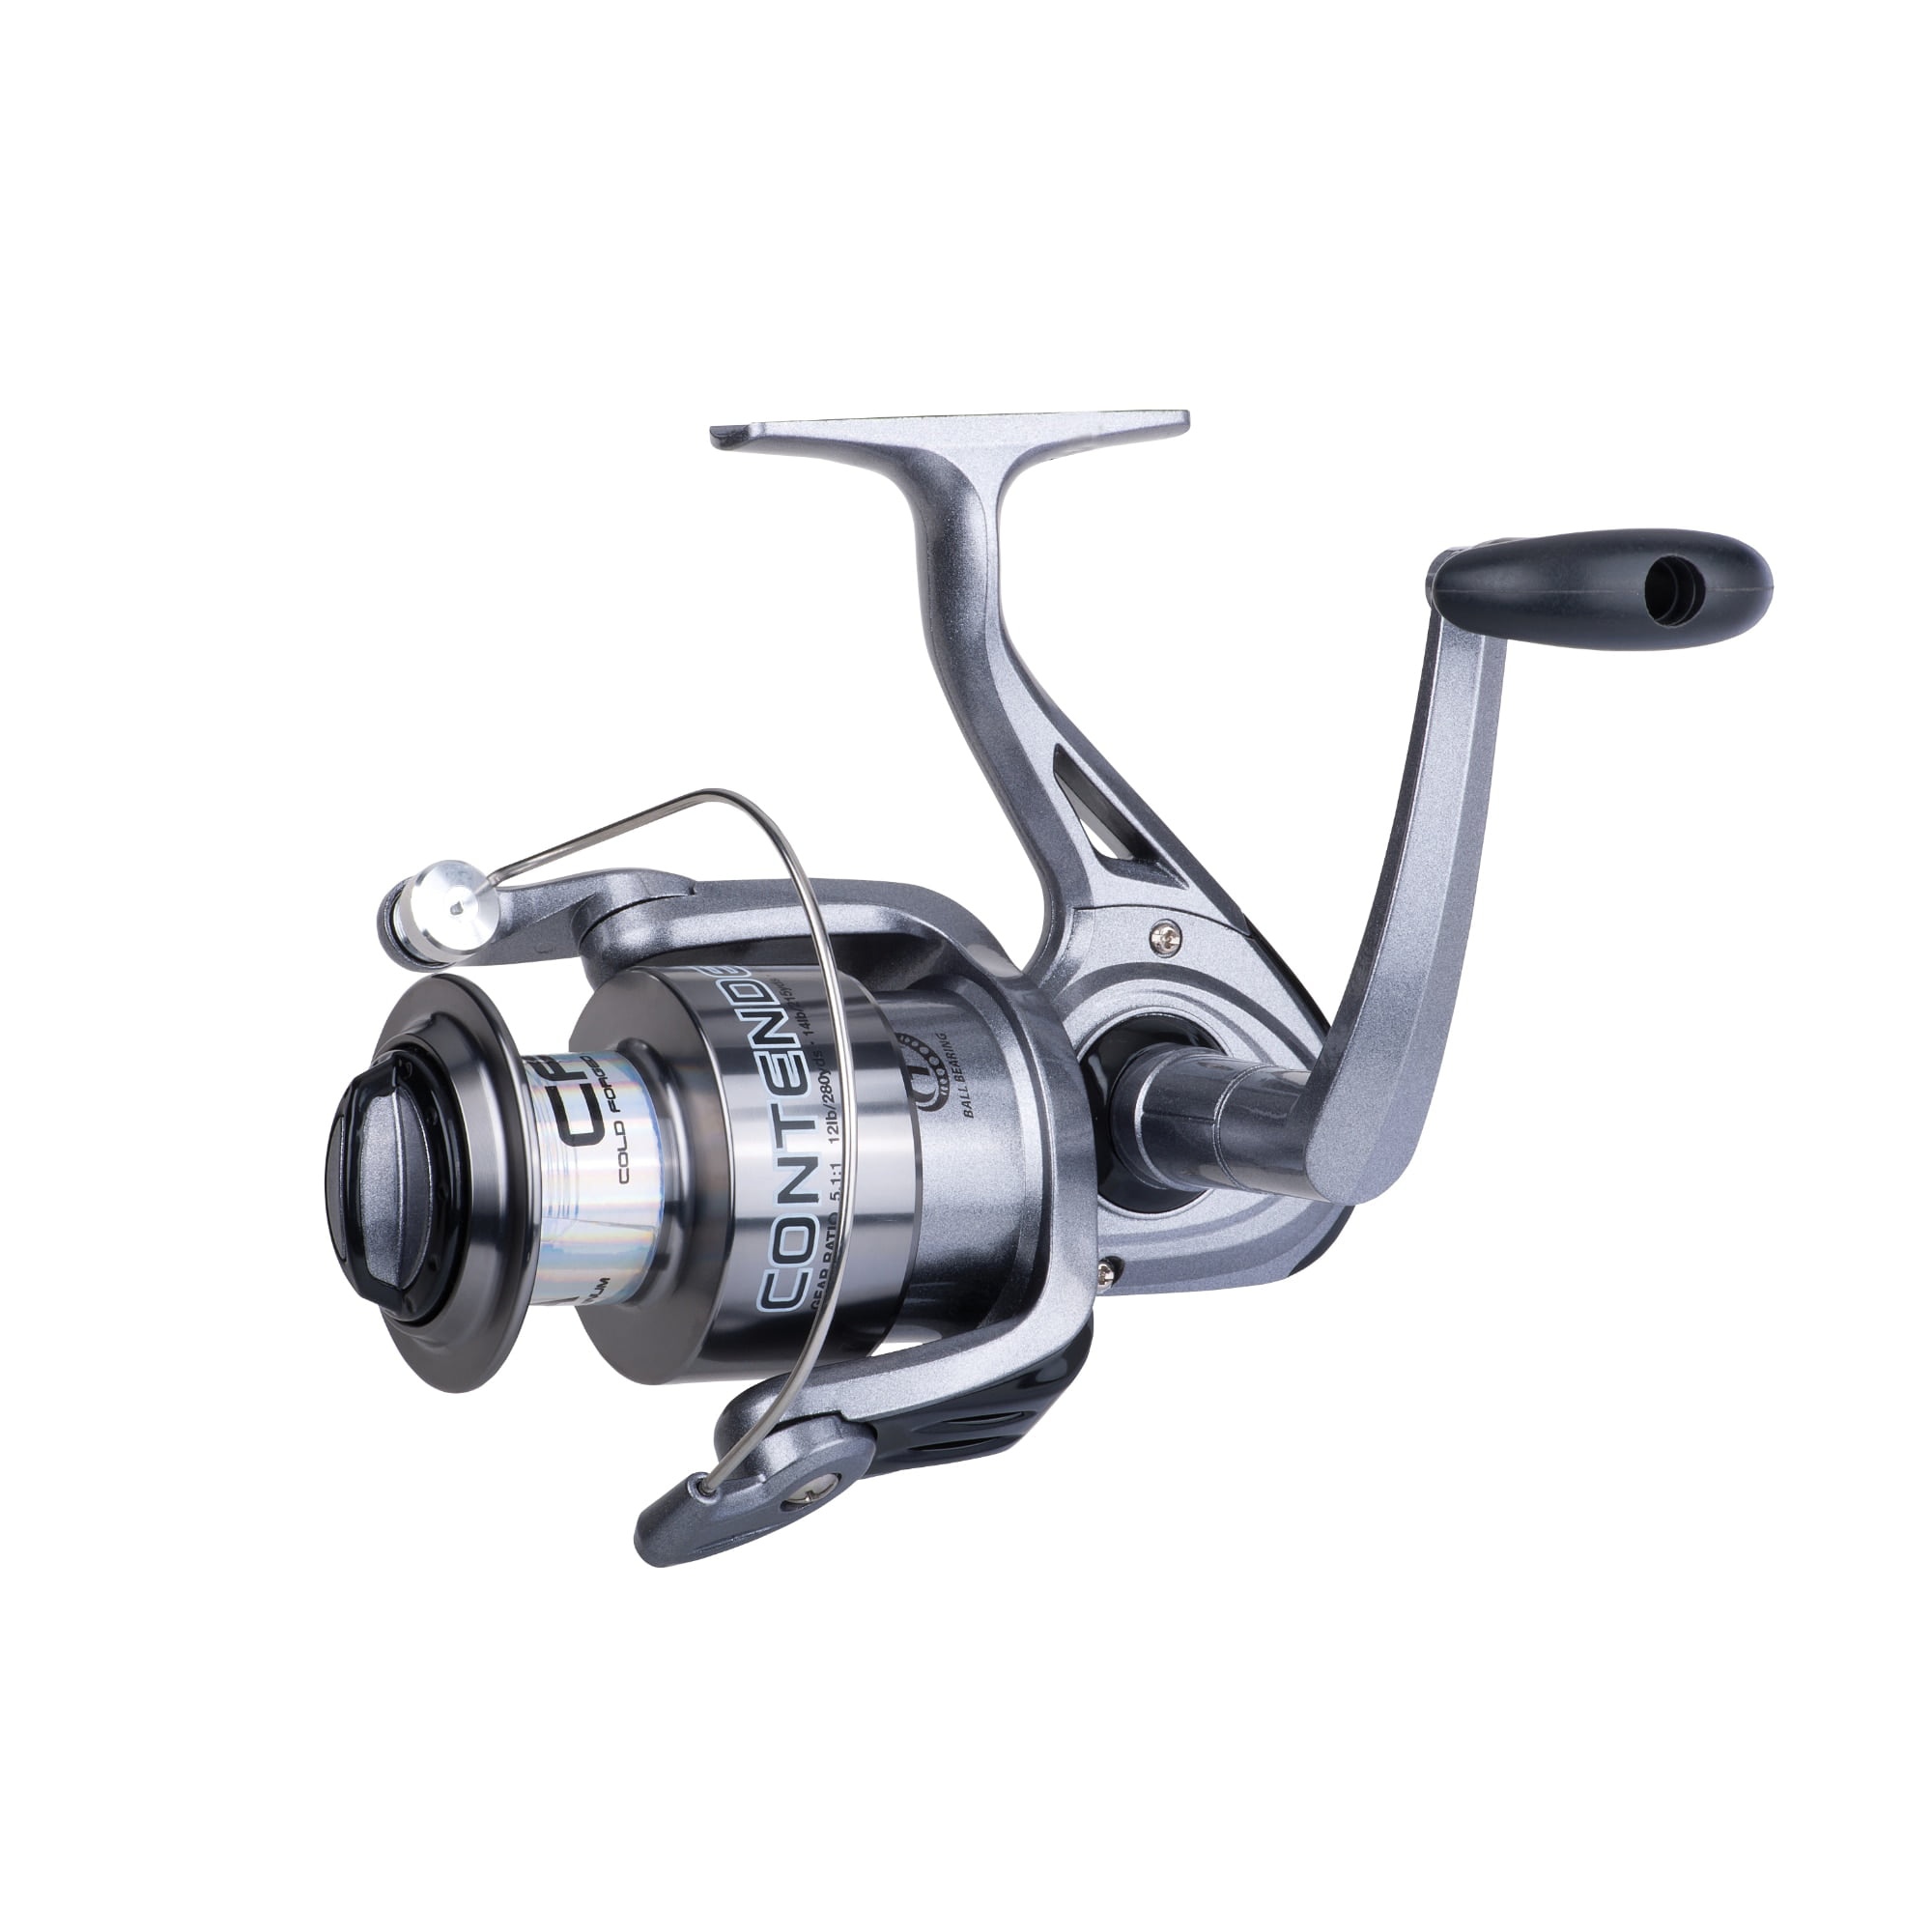  Shakespeare Contender Big Water Spinning Fishing Reel, 20 -  Box, Multi : Sports & Outdoors